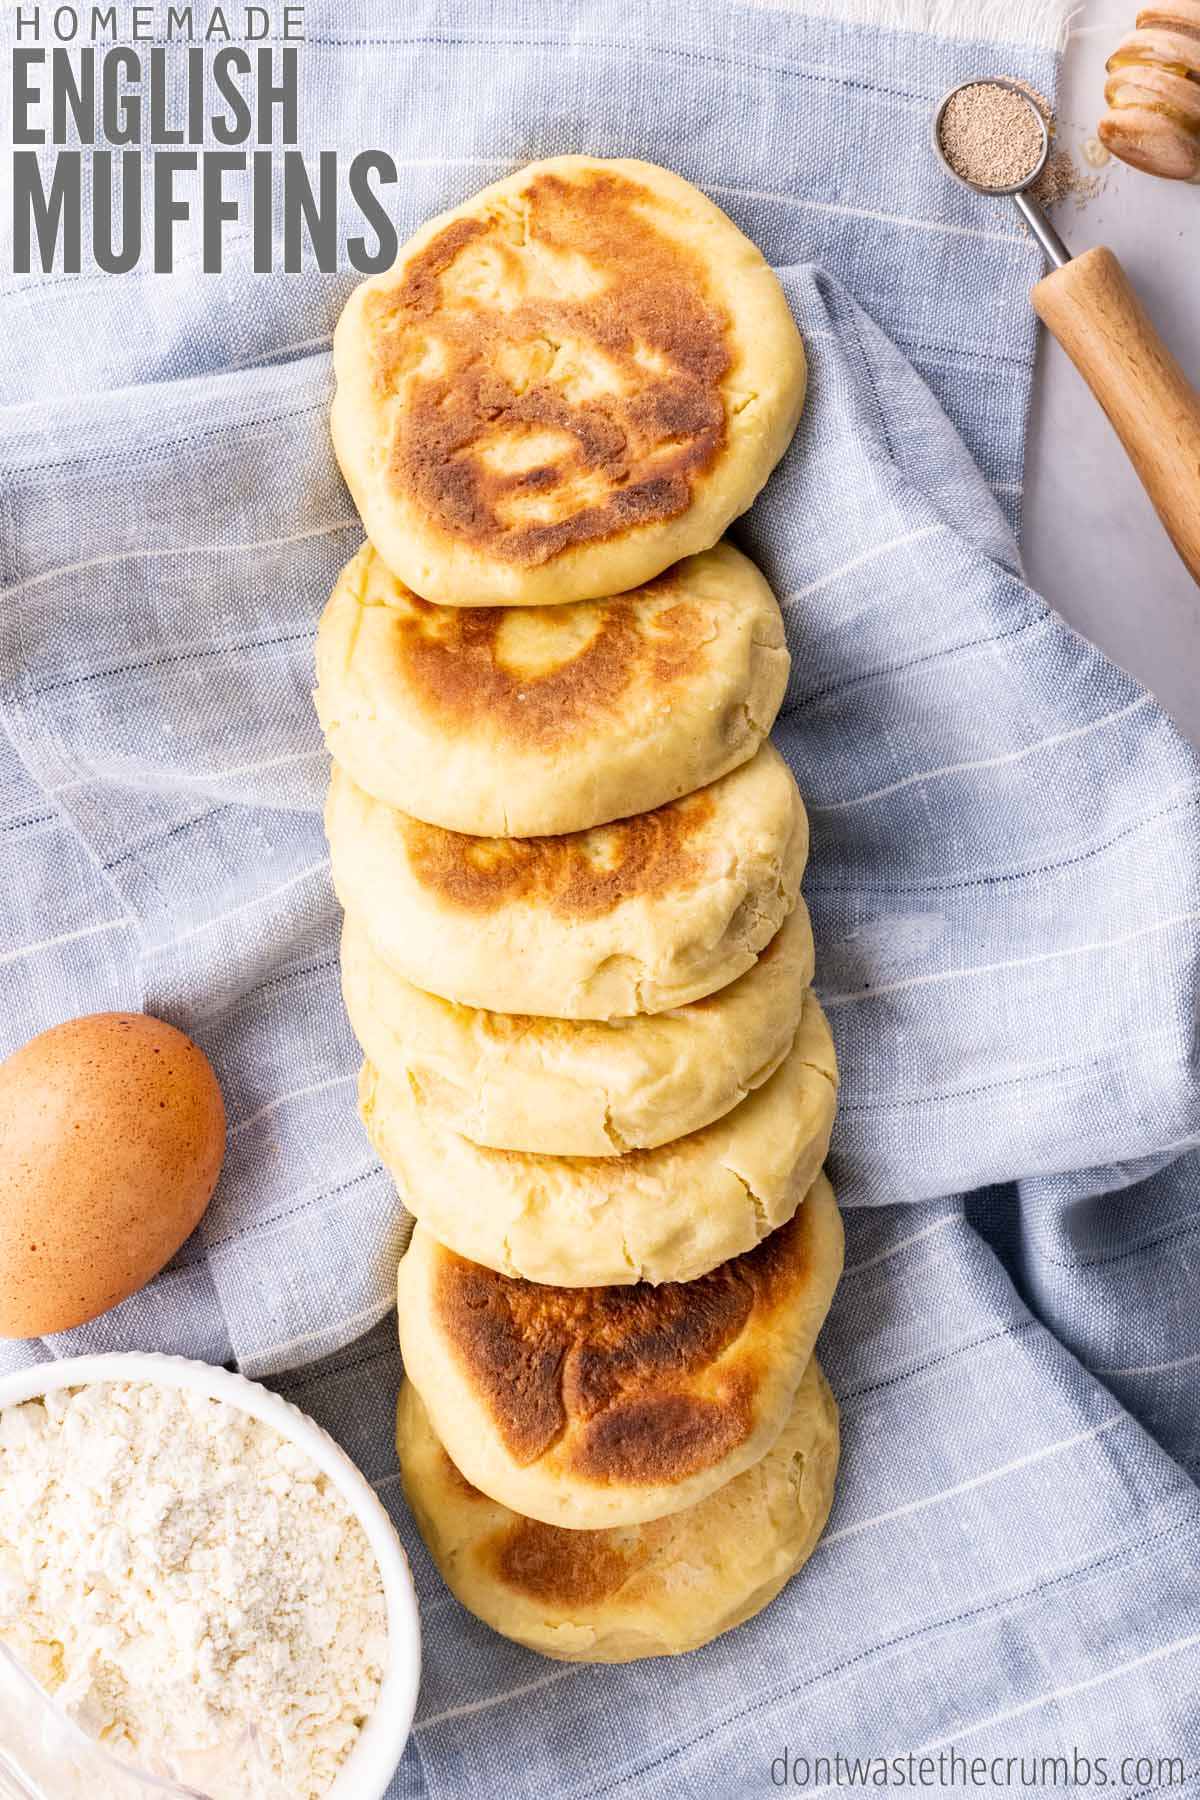 https://dontwastethecrumbs.com/wp-content/uploads/2023/05/Homemade-English-Muffin_cover.jpg